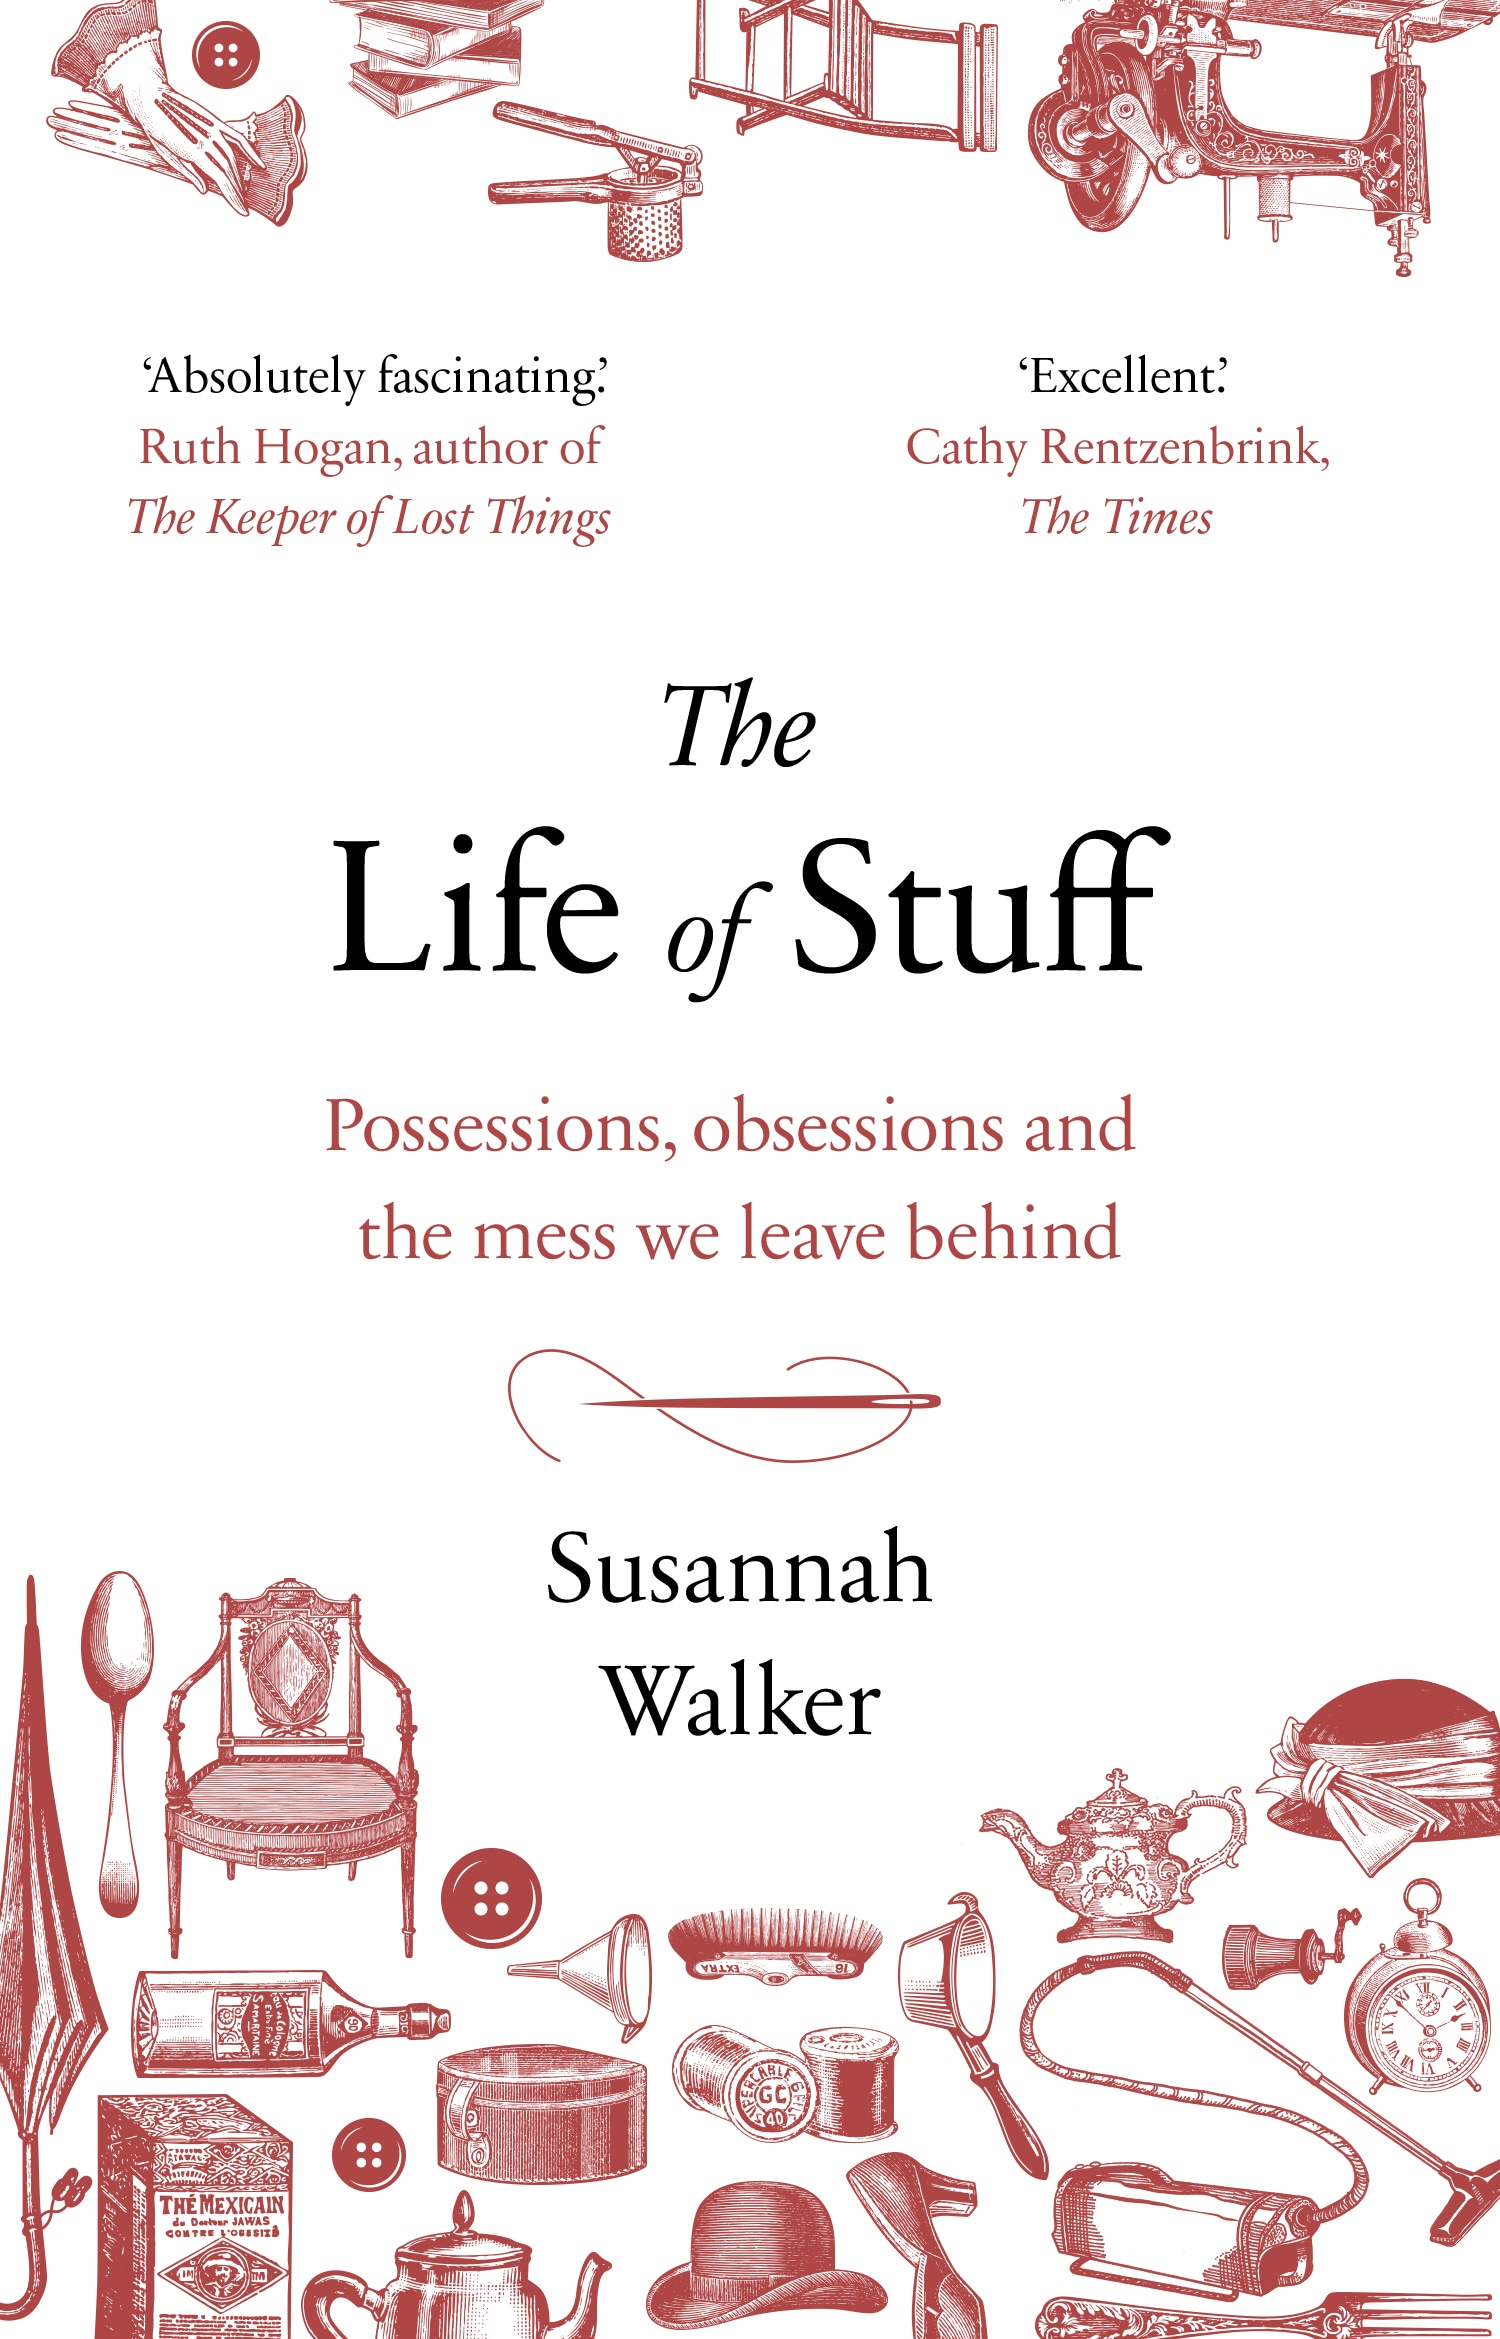 Book “The Life of Stuff” by Susannah Walker — January 10, 2019